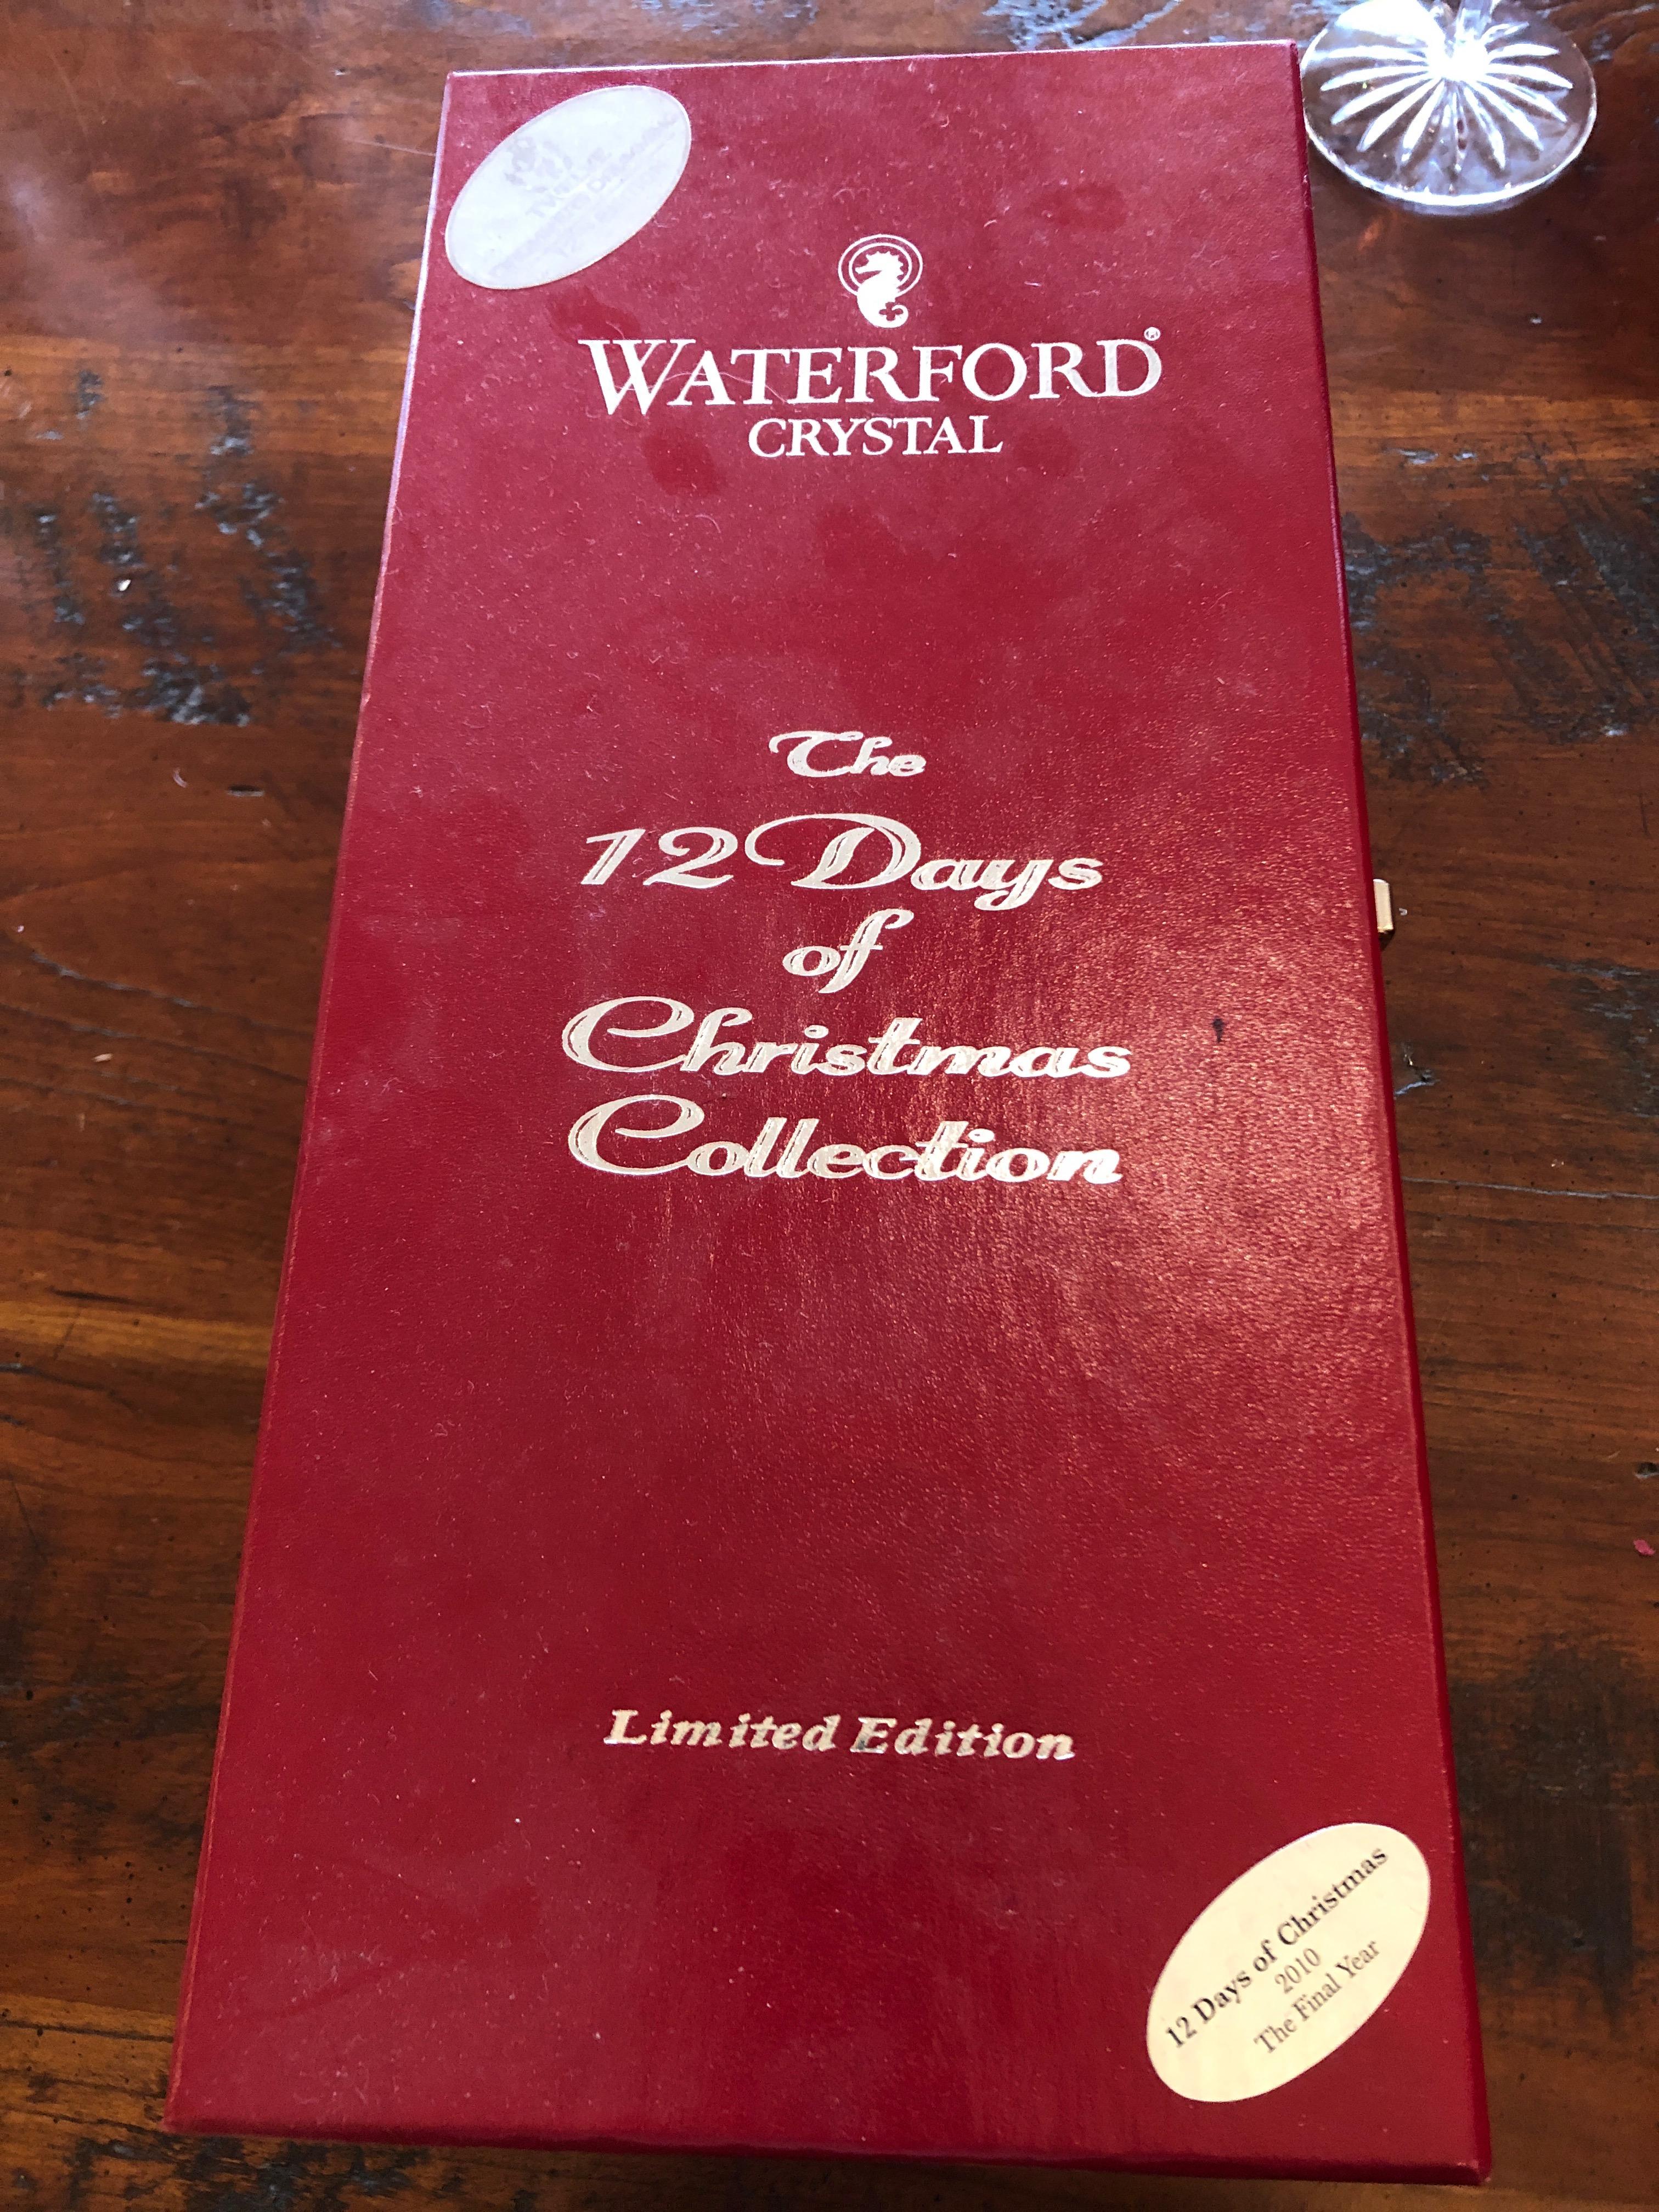 Like new set of Waterford Crystal limited edition champagne flutes based on the 12 days of Christmas and appropriately etched to match which day. Each comes with original gift box, paperwork and hanging charm.